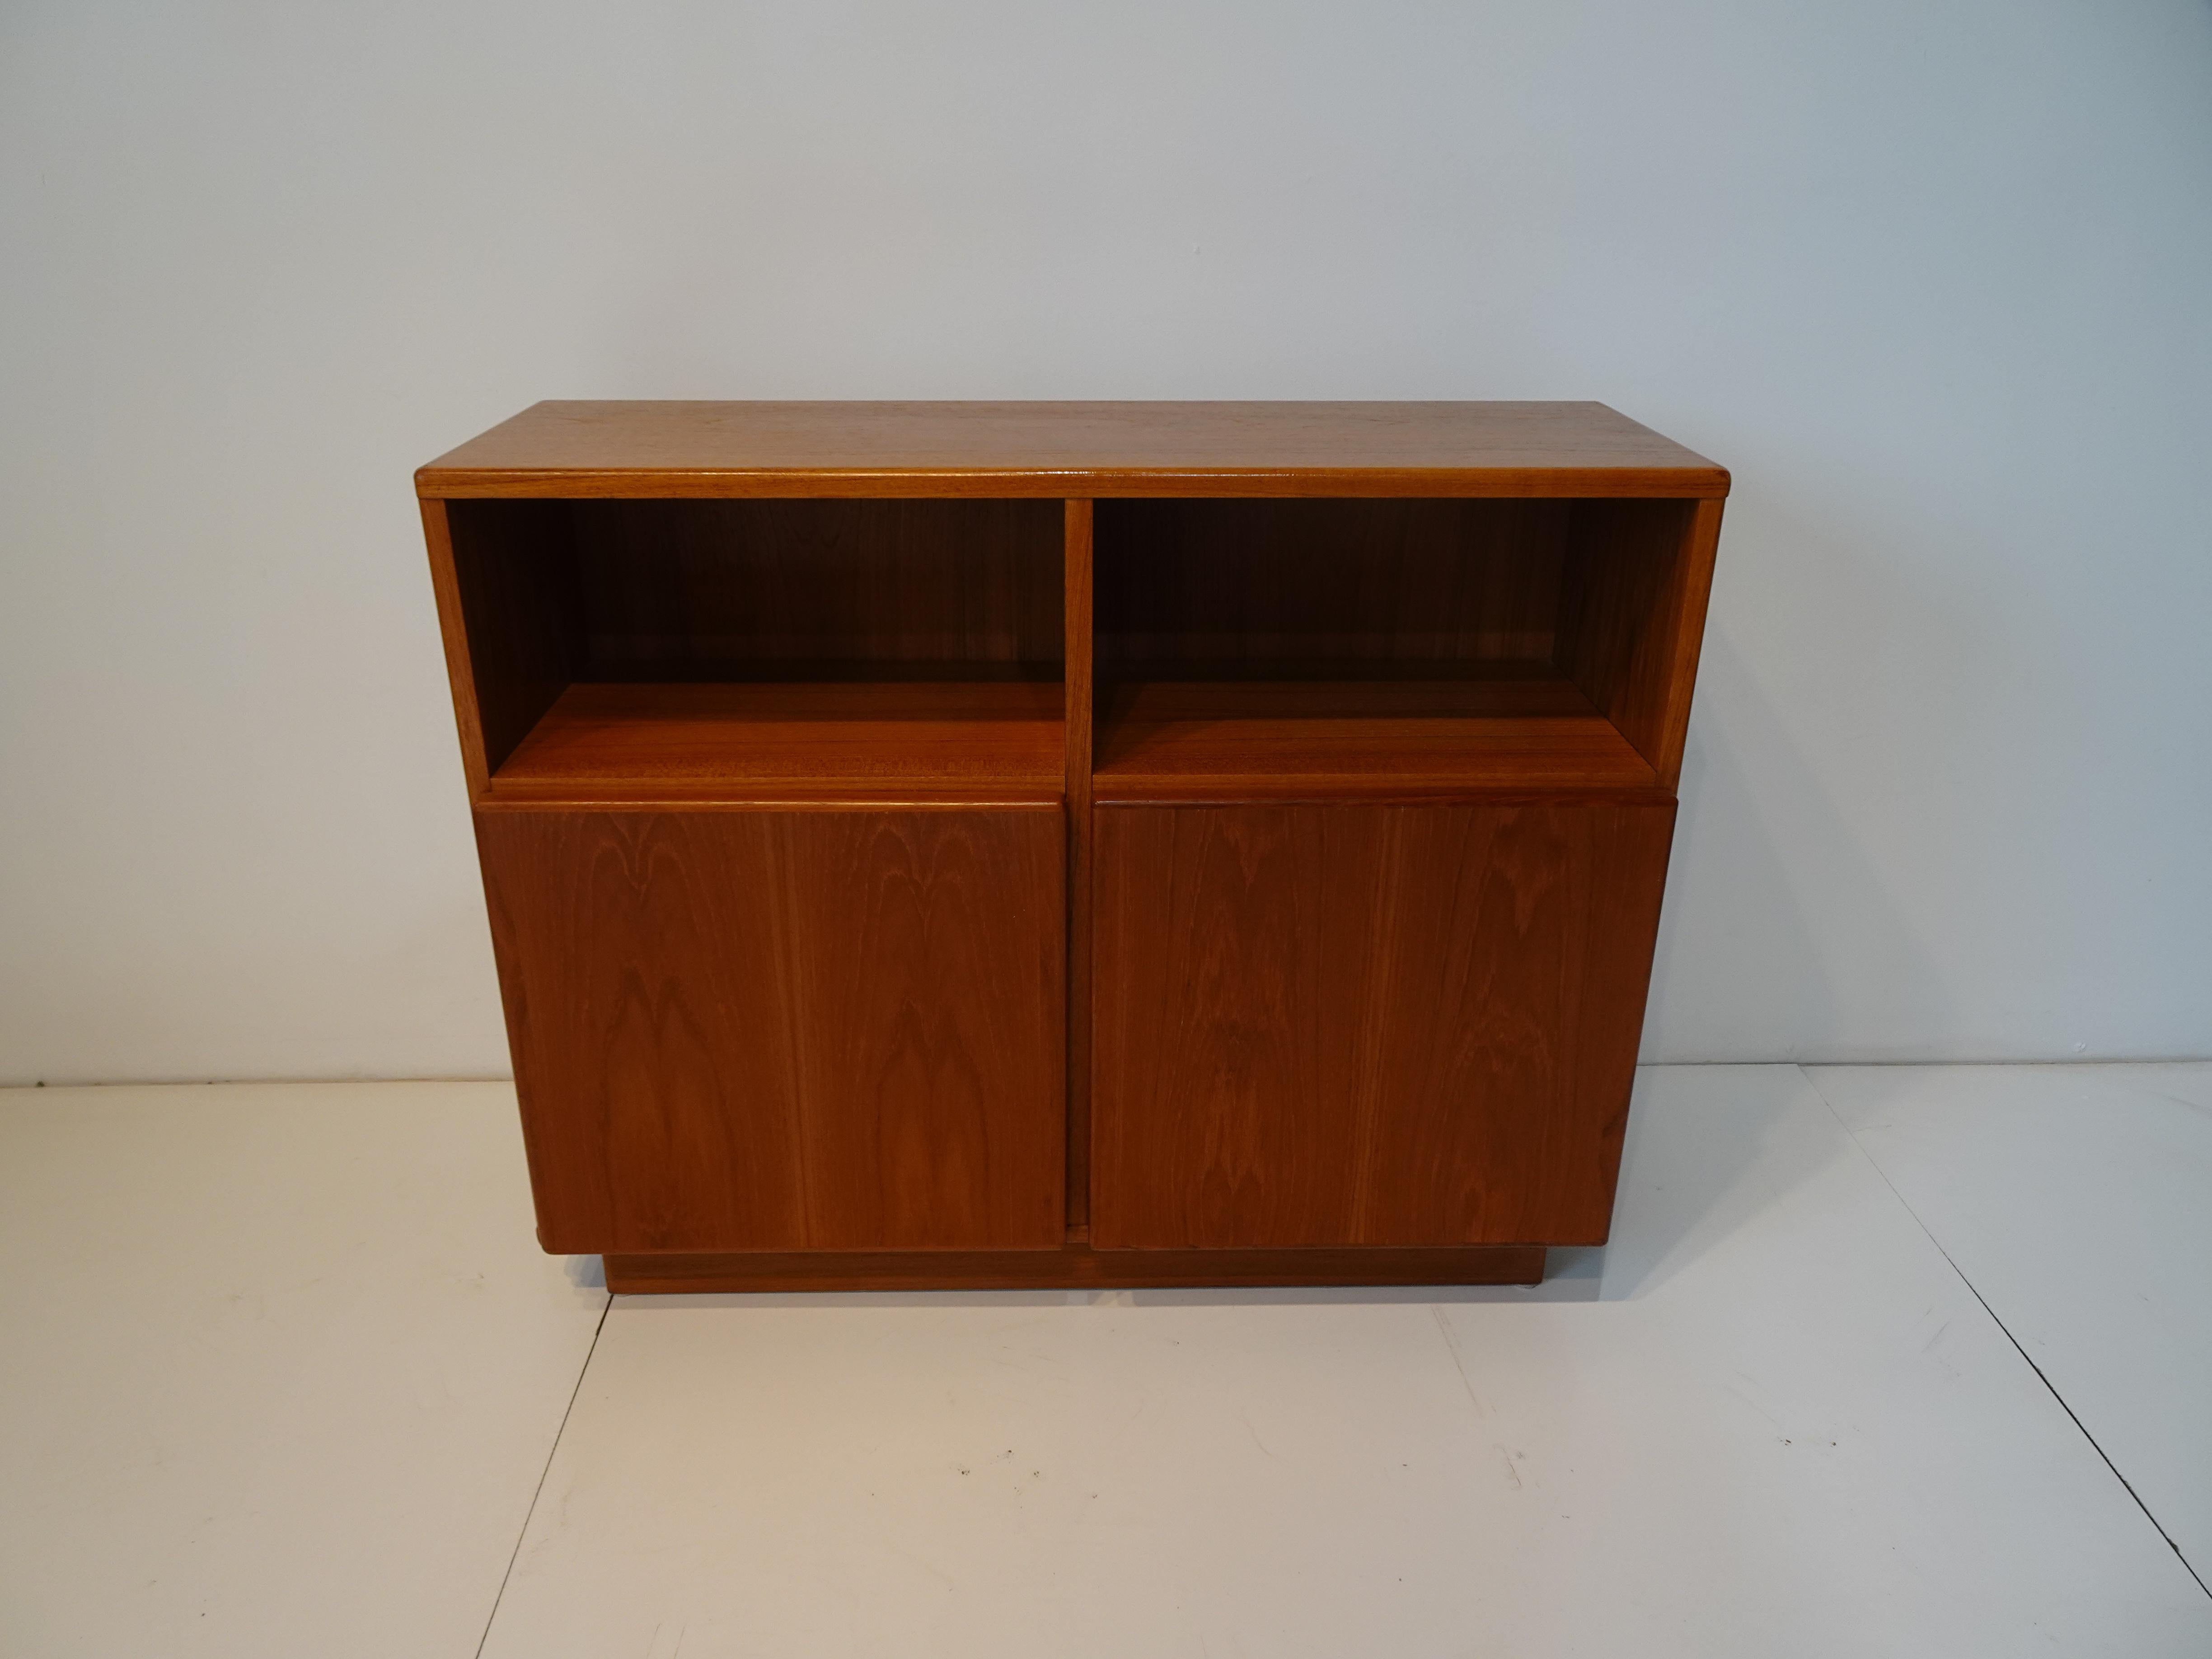 A very slim profiled smaller scale teak wood cabinet with two doors, storage with upper storage bin areas and a finished back . Great for a entrance way , end of hallway or as an entertainment center, the piece is a bit lighter in tone that pictured.